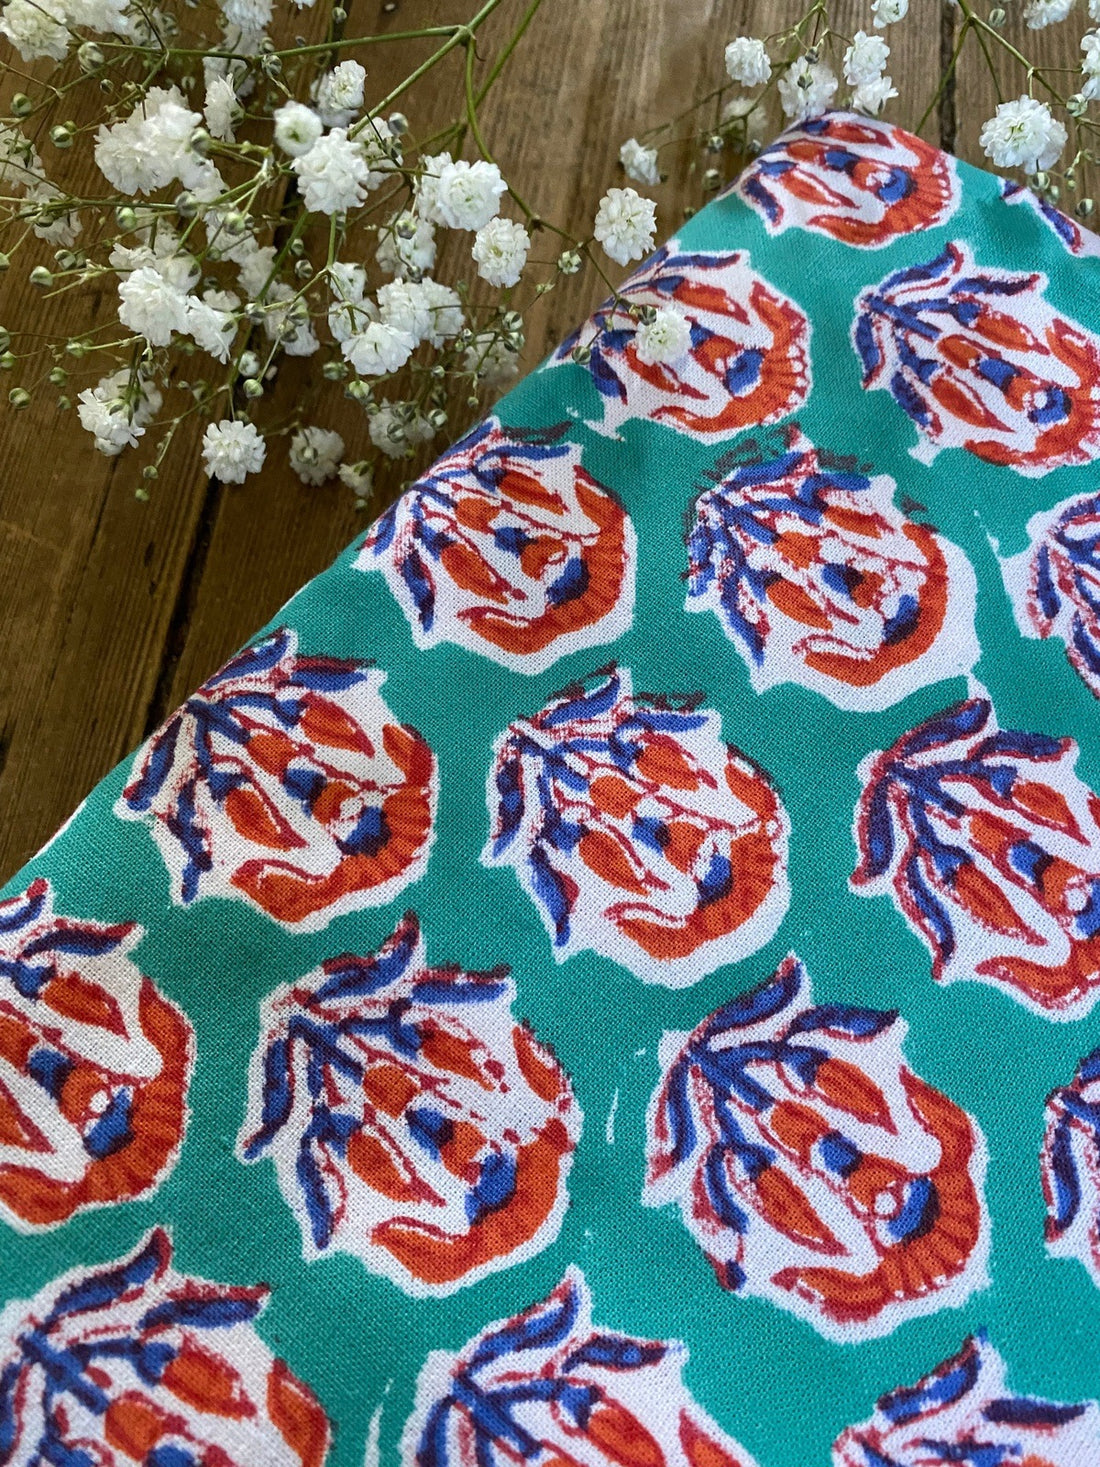 Indian Block Print Tablecloth - Blue, Turquoise and Burnt Orange